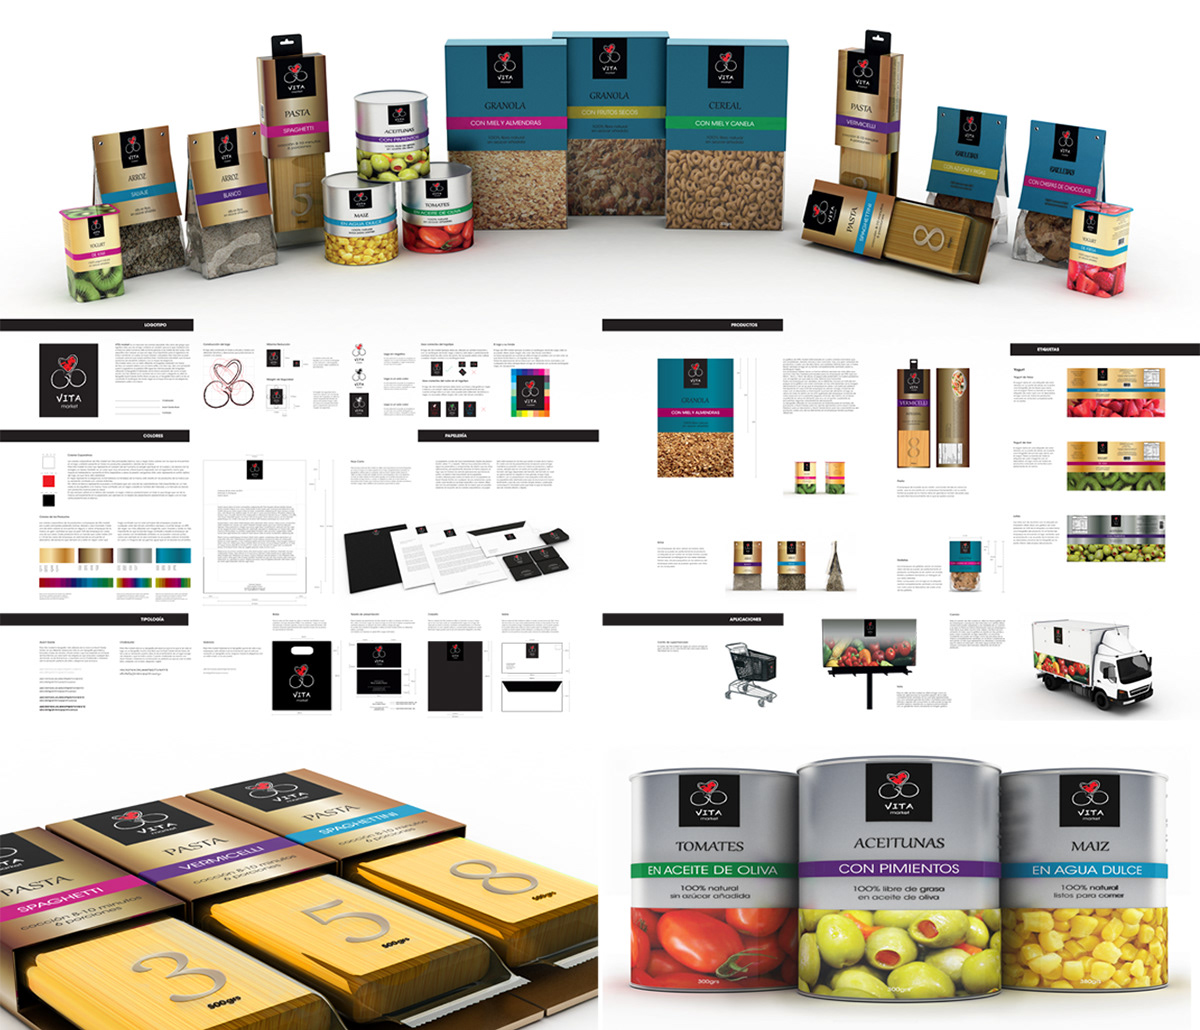 thesis Supermarket type design colors 3D print heart black identity brand Renders products Food  final